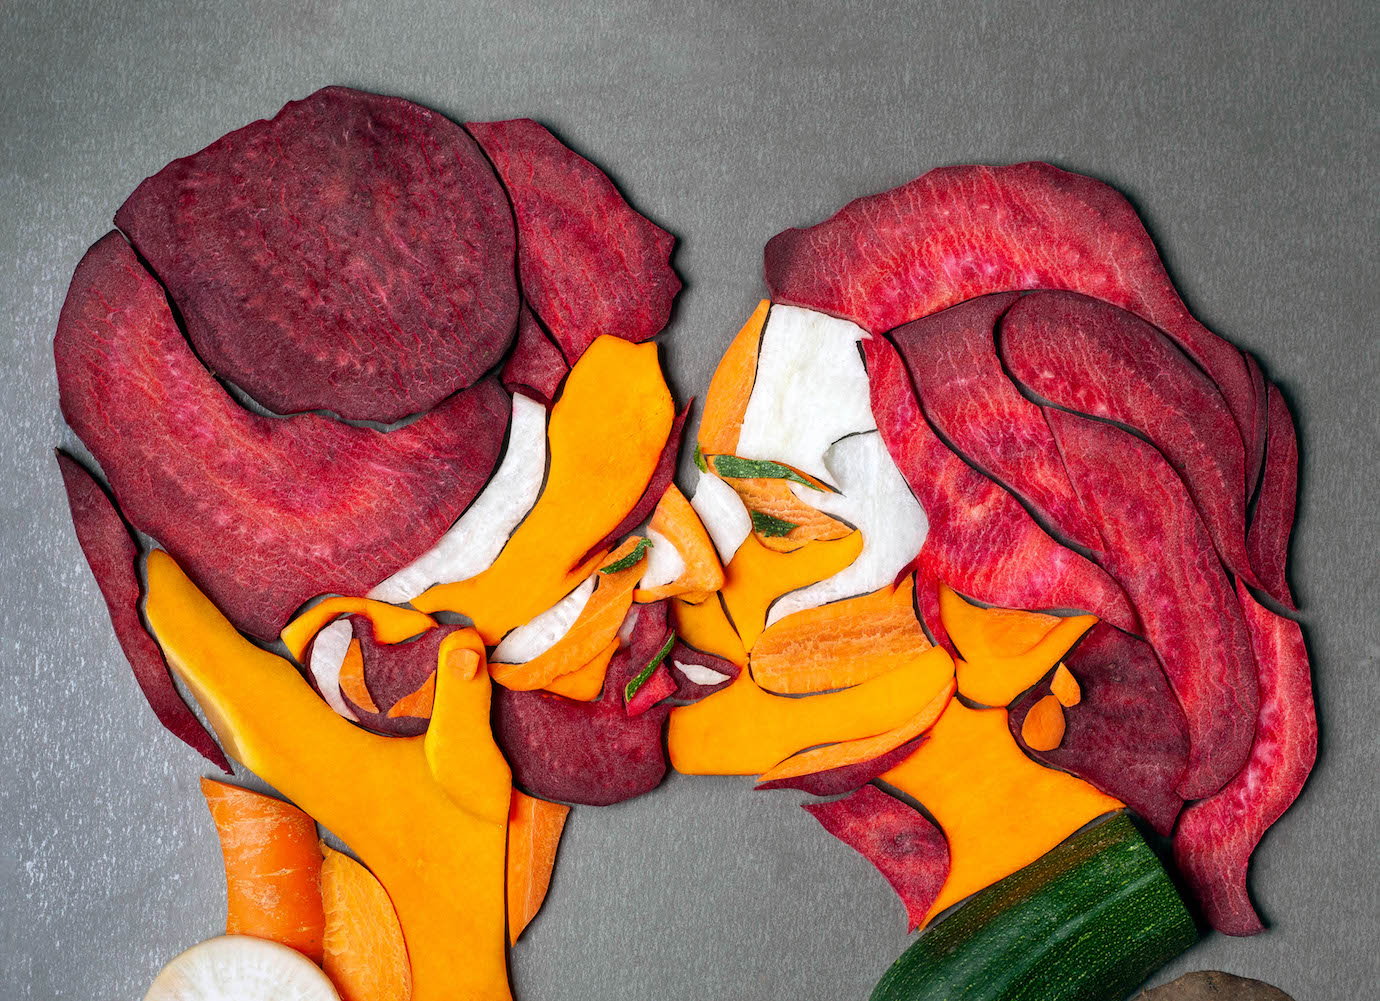 When lunch becomes art: figurative artworks made entirely from food